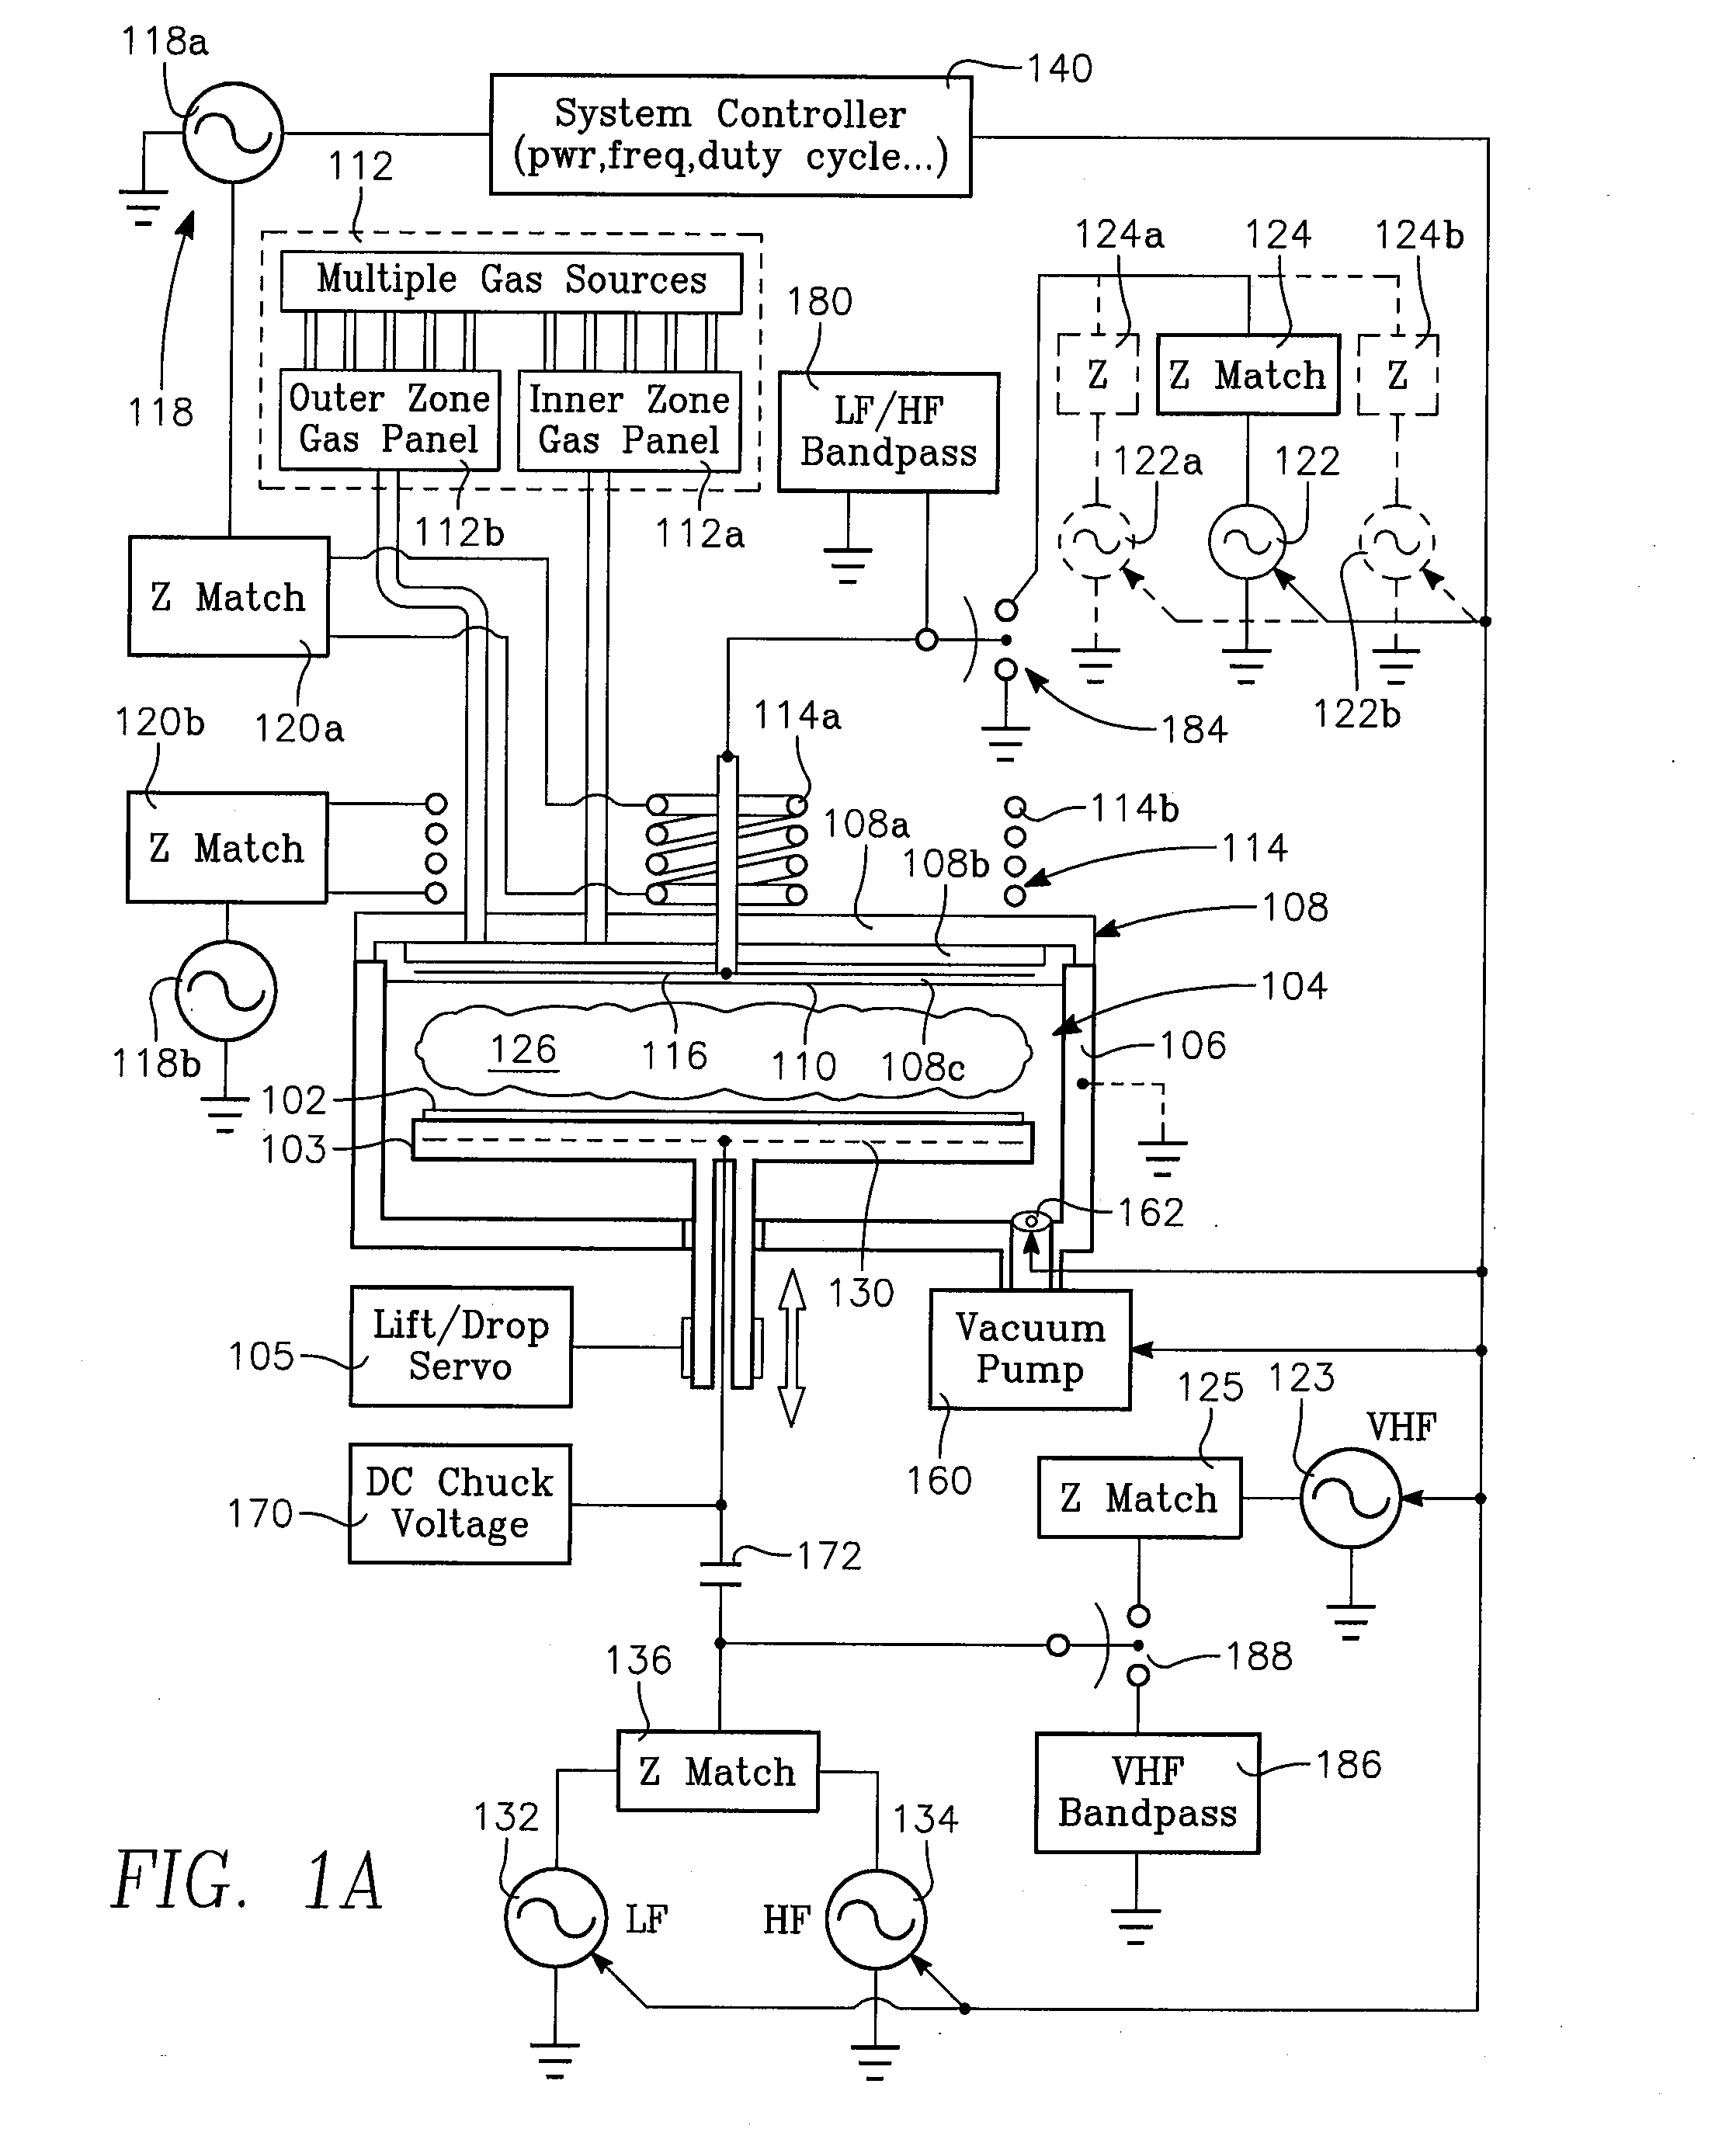 Plasma process for inductively coupling power through a gas distribution plate while adjusting plasma distribution